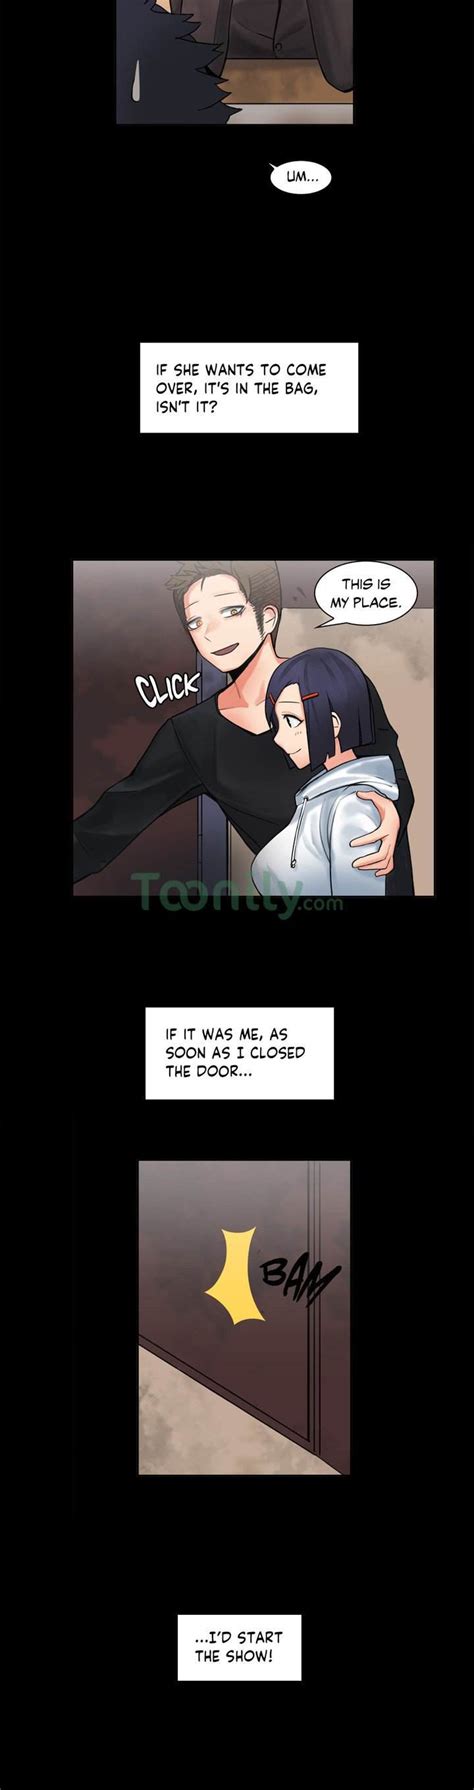 Utterly stuck in the wall! The Girl That Got Stuck in the Wall - Chapter 5 - ToonGod